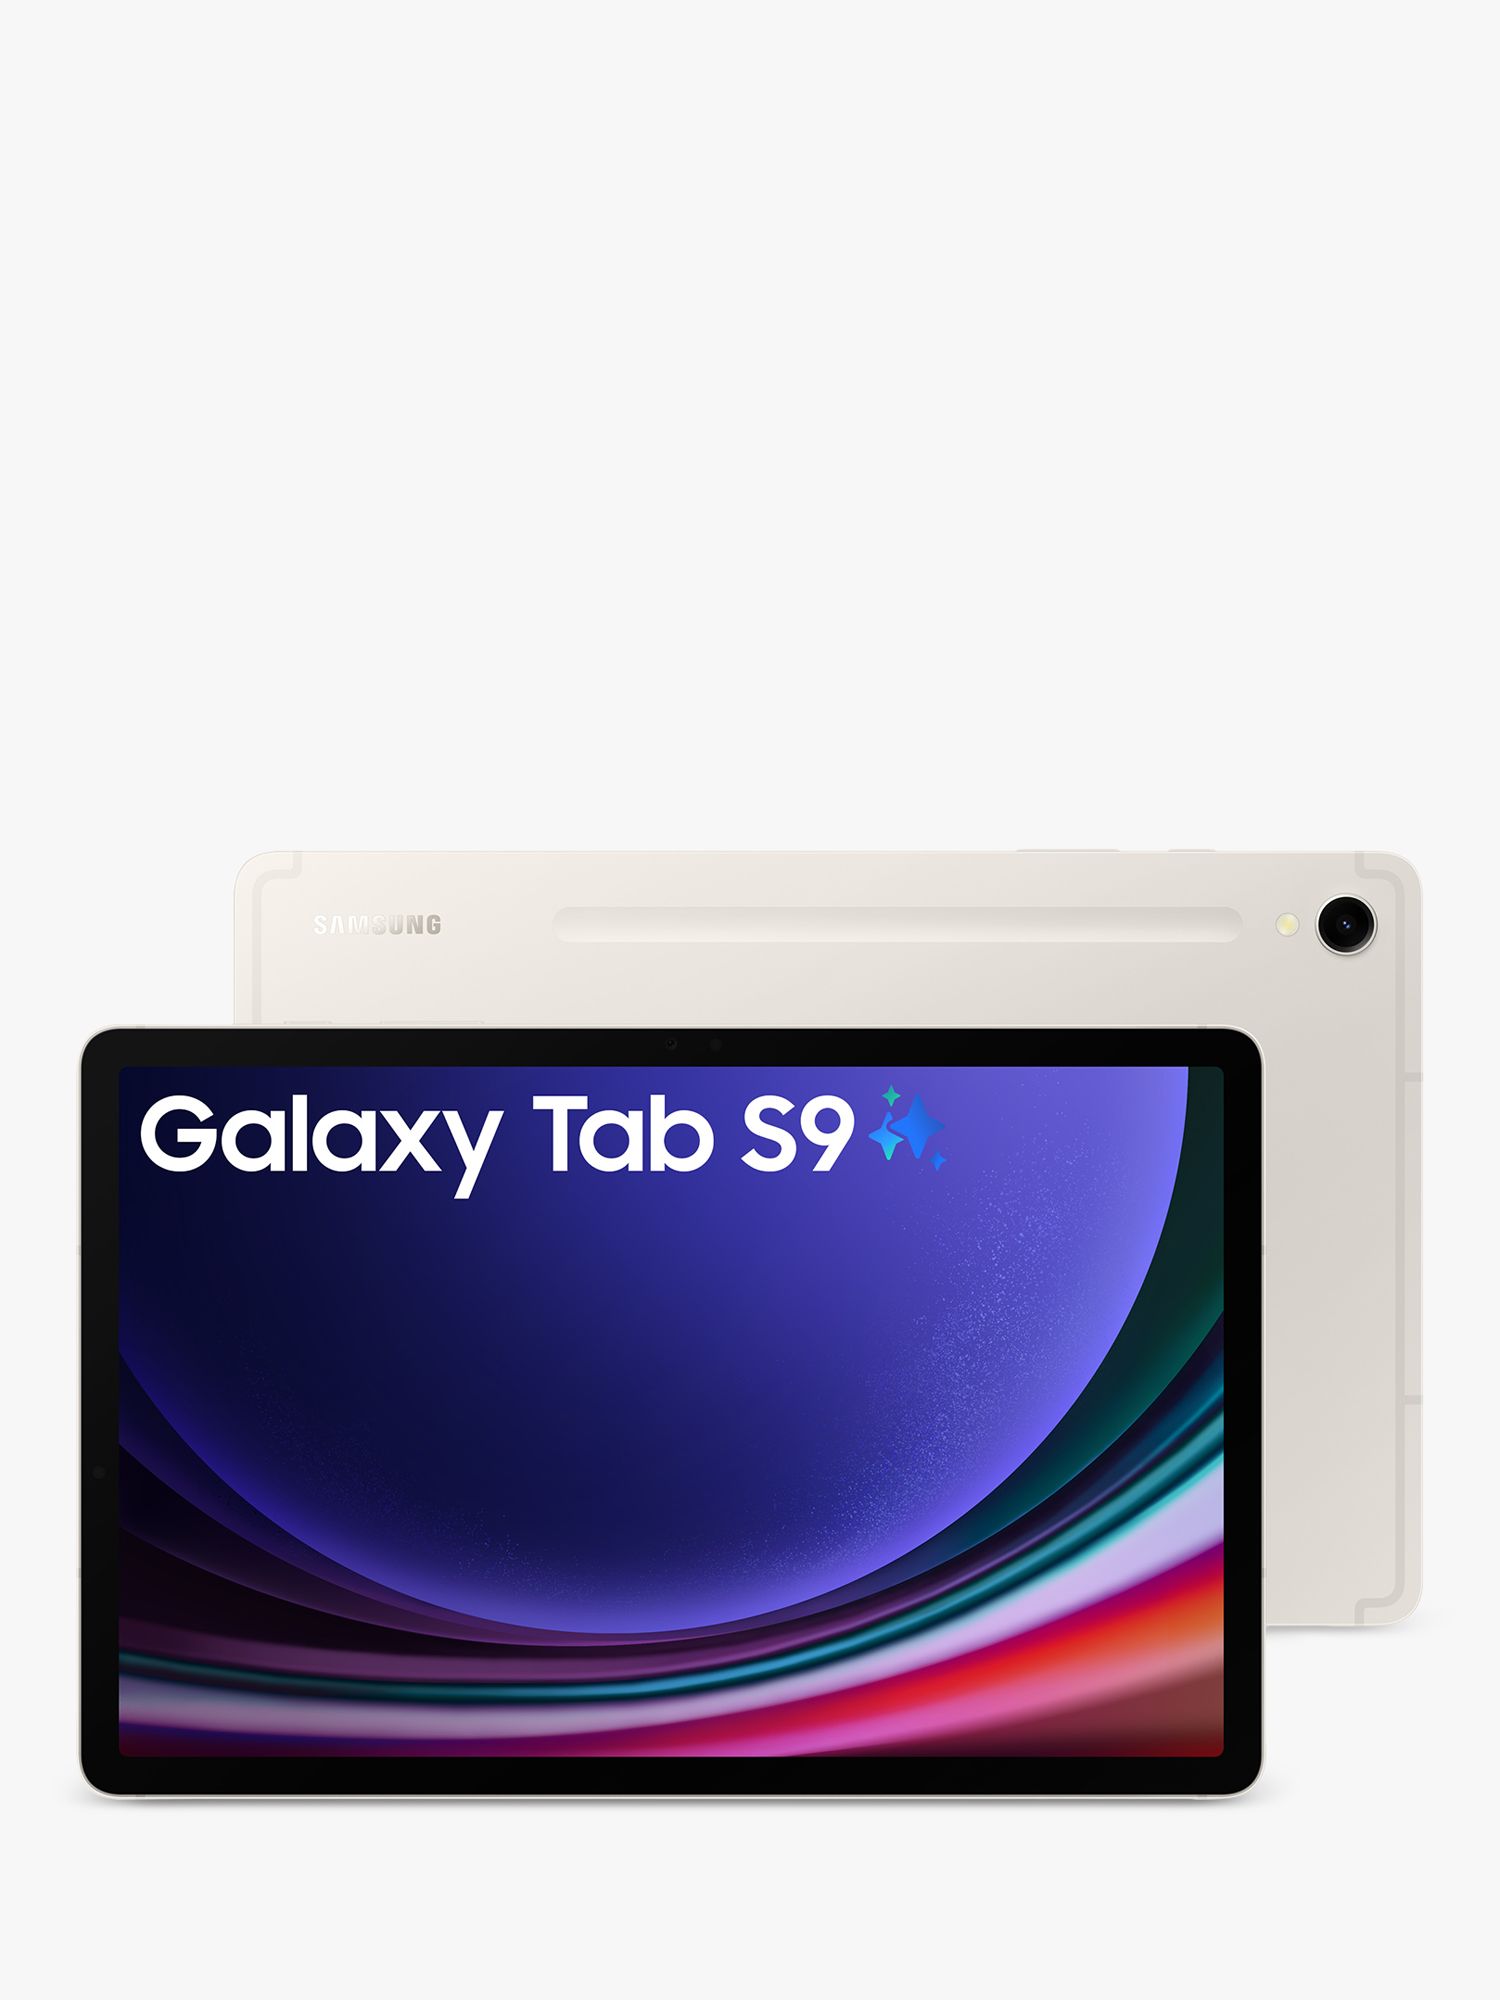  SAMSUNG Galaxy Tab S9 FE Wi-Fi 10.9” 128GB Android Tablet,  IP68 Water- and Dust-Resistant, Long Battery Life, Powerful Processor, S  Pen, 8MP Camera, Lightweight Design, US Version, 2023, Gray 